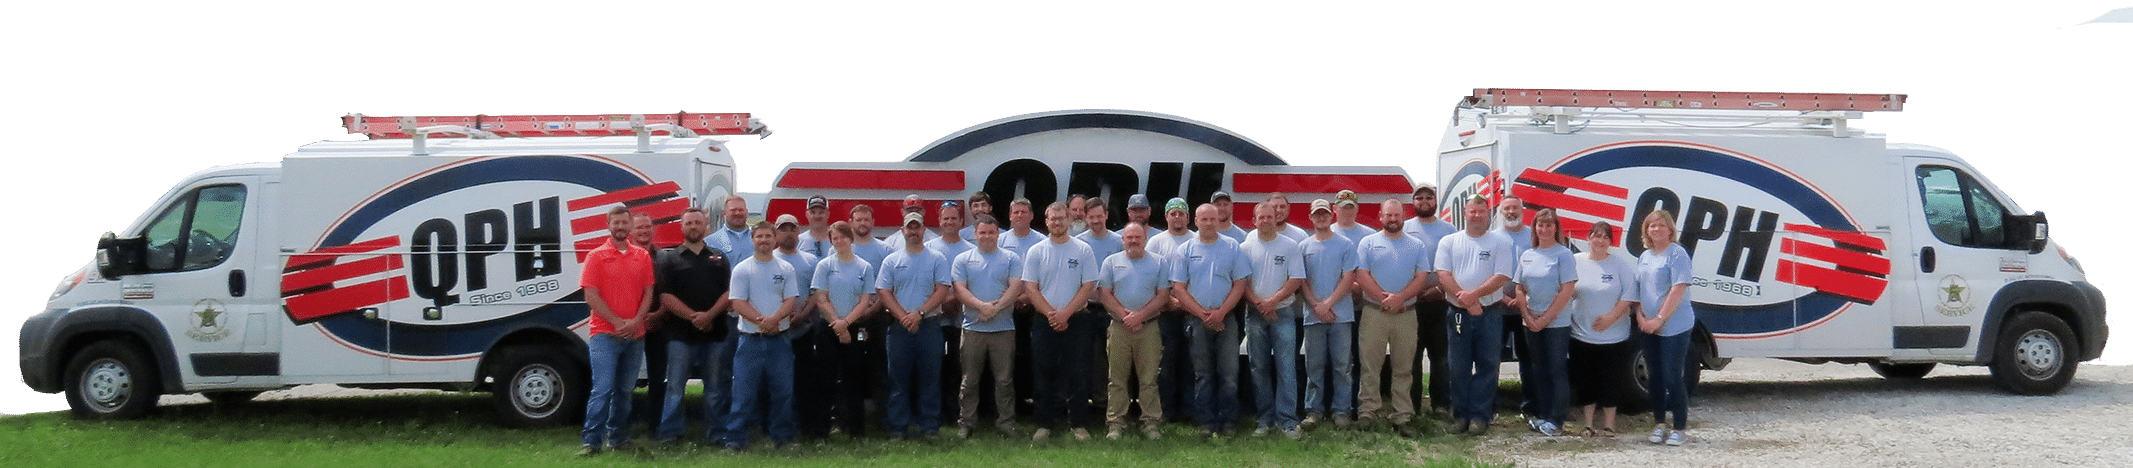 Professional HVAC Automation Controls Team Indianapolis IN